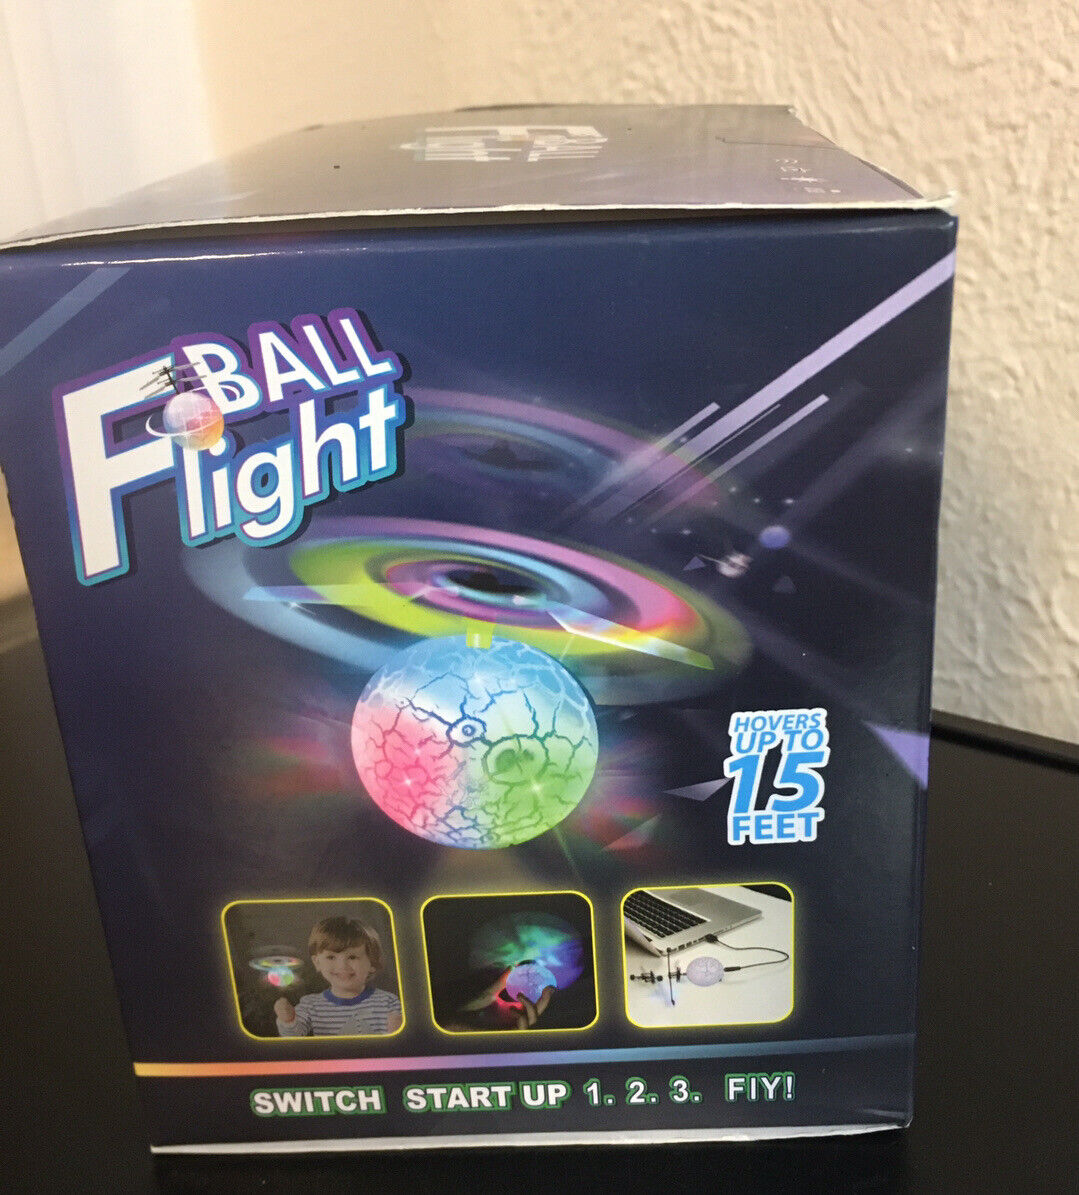 Yezia Ball Flight Control w/ Palm Or Foot  Bright LED’s USB Rechargeable New Yezia Does not apply - фотография #4